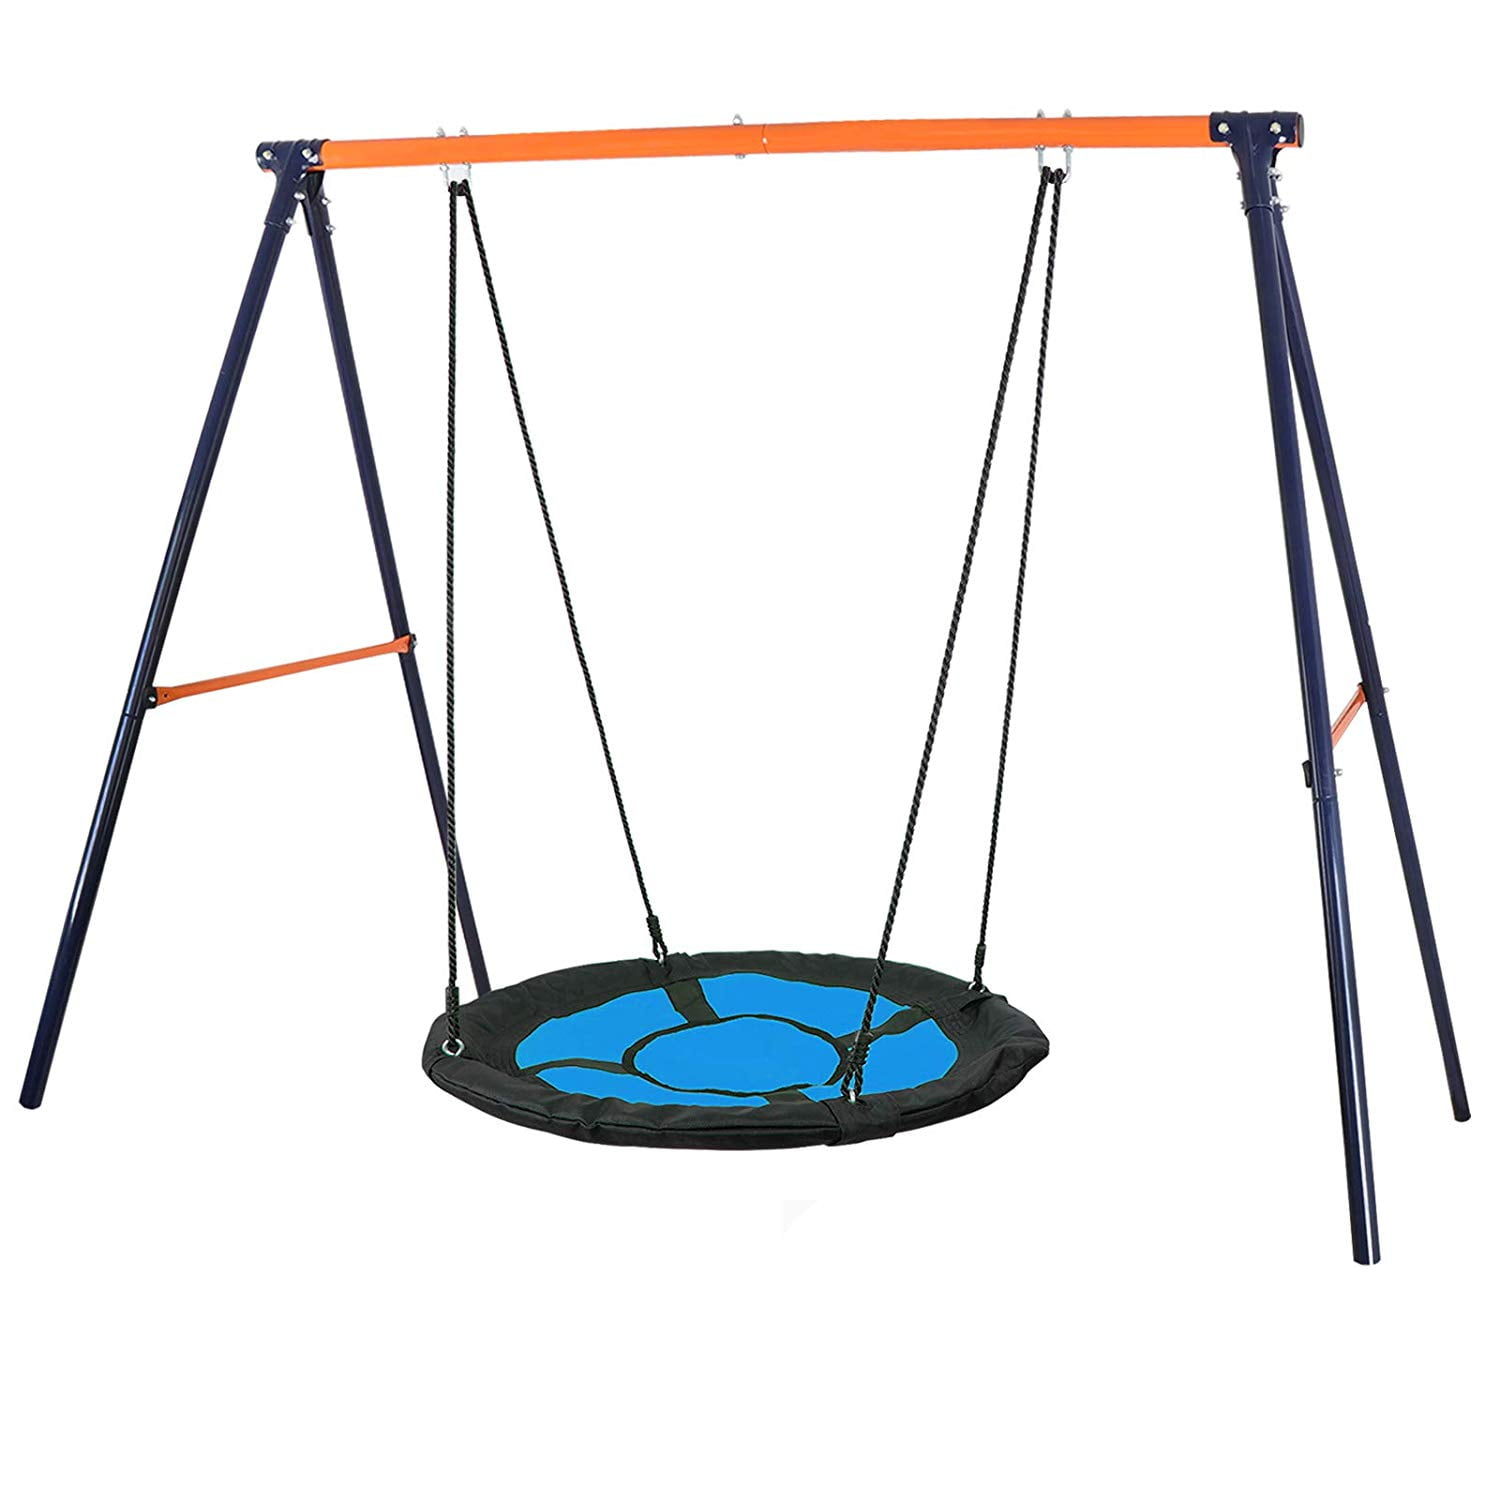 40 Inch Combo Kids Web Tree Saucer Swing Set and All-Steel All Weather Stand 